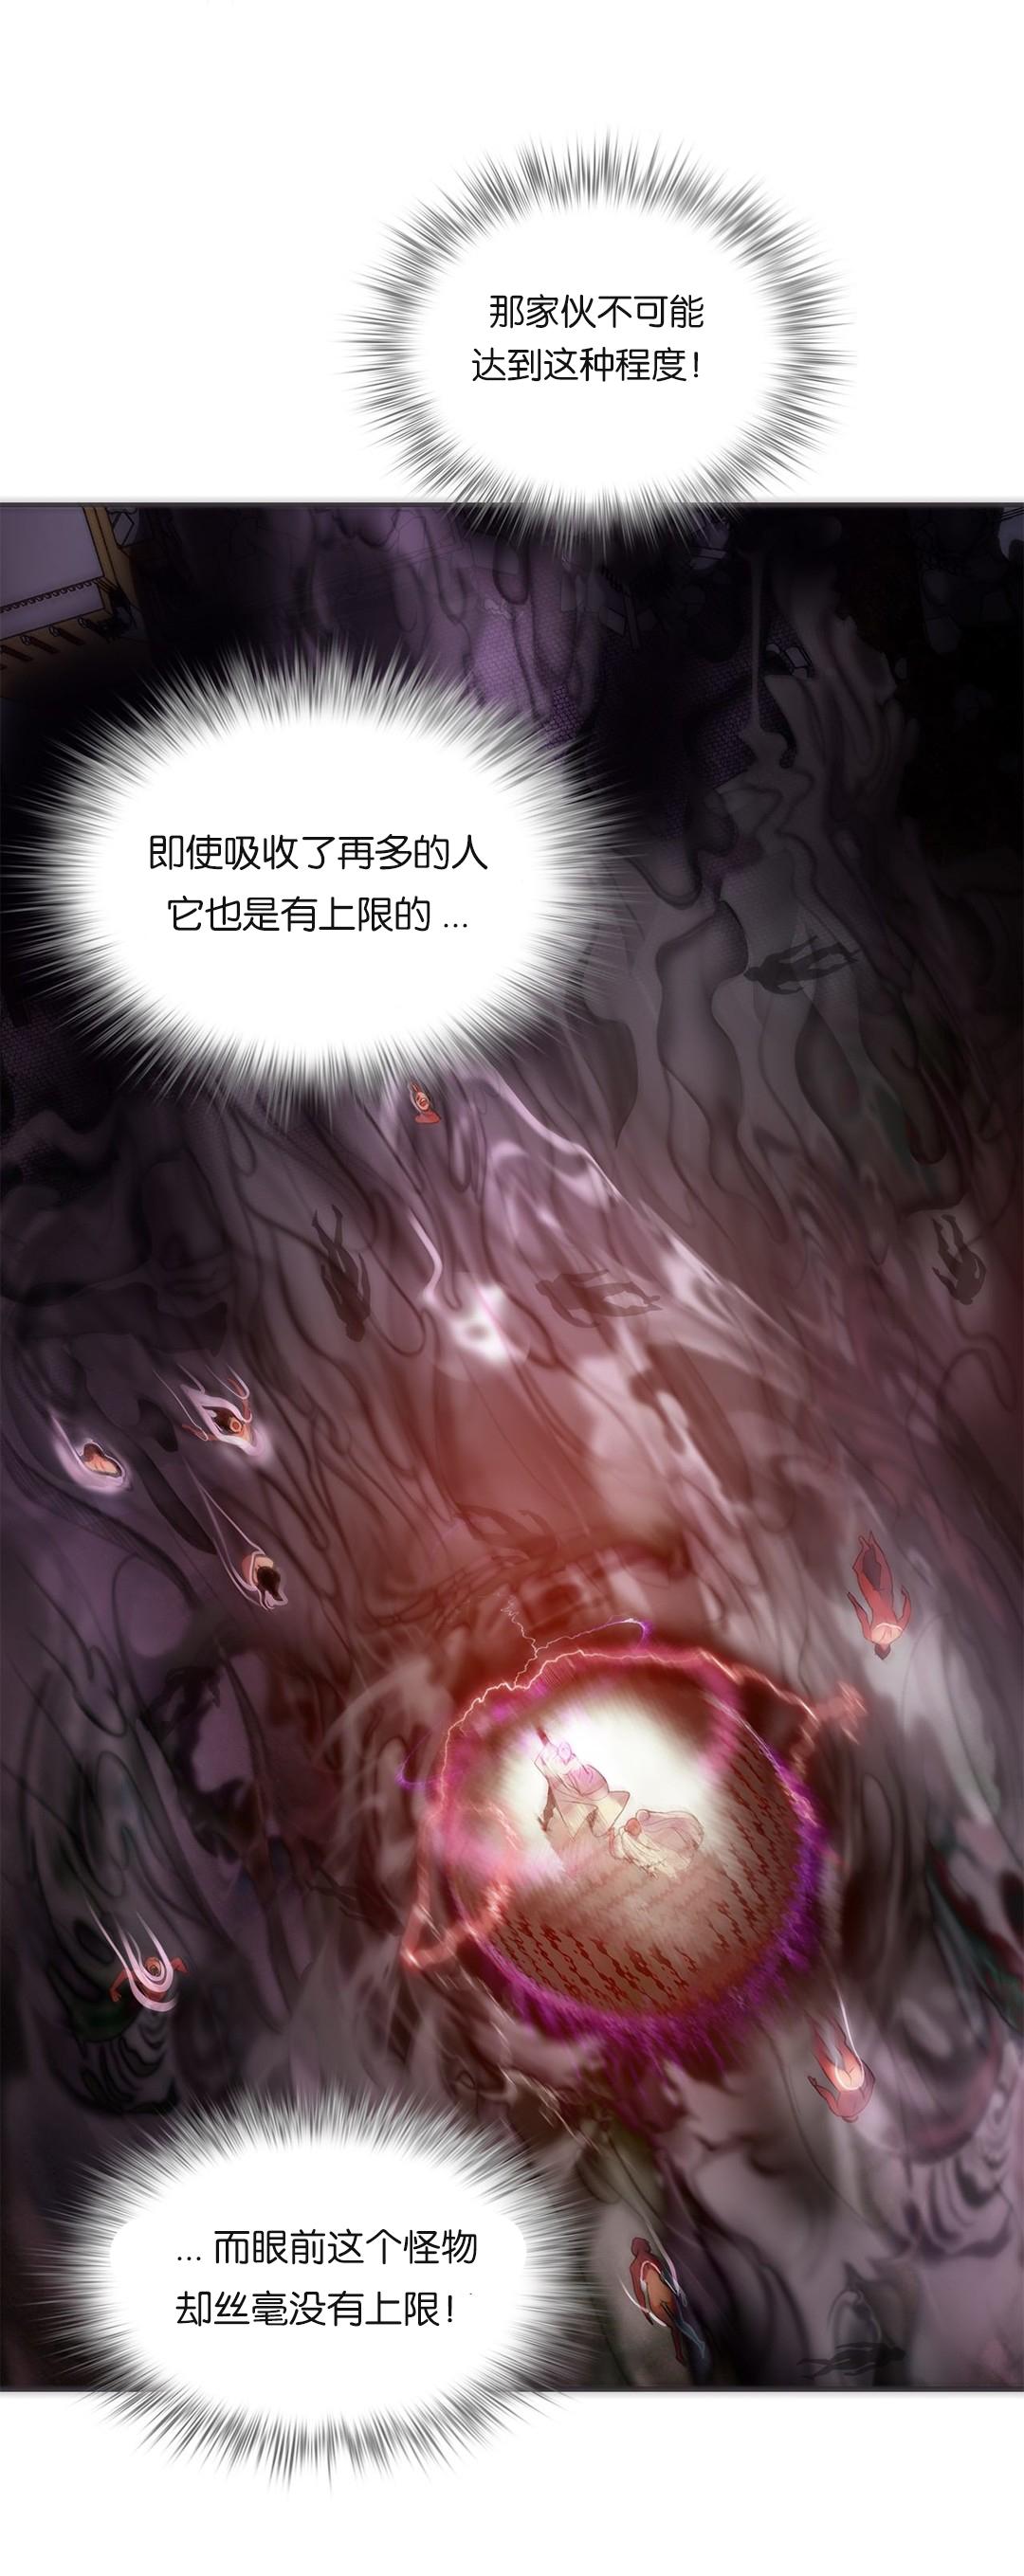 [Juder] Lilith`s Cord (第二季) Ch.61-63 [Chinese] [aaatwist个人汉化] [Ongoing] 21